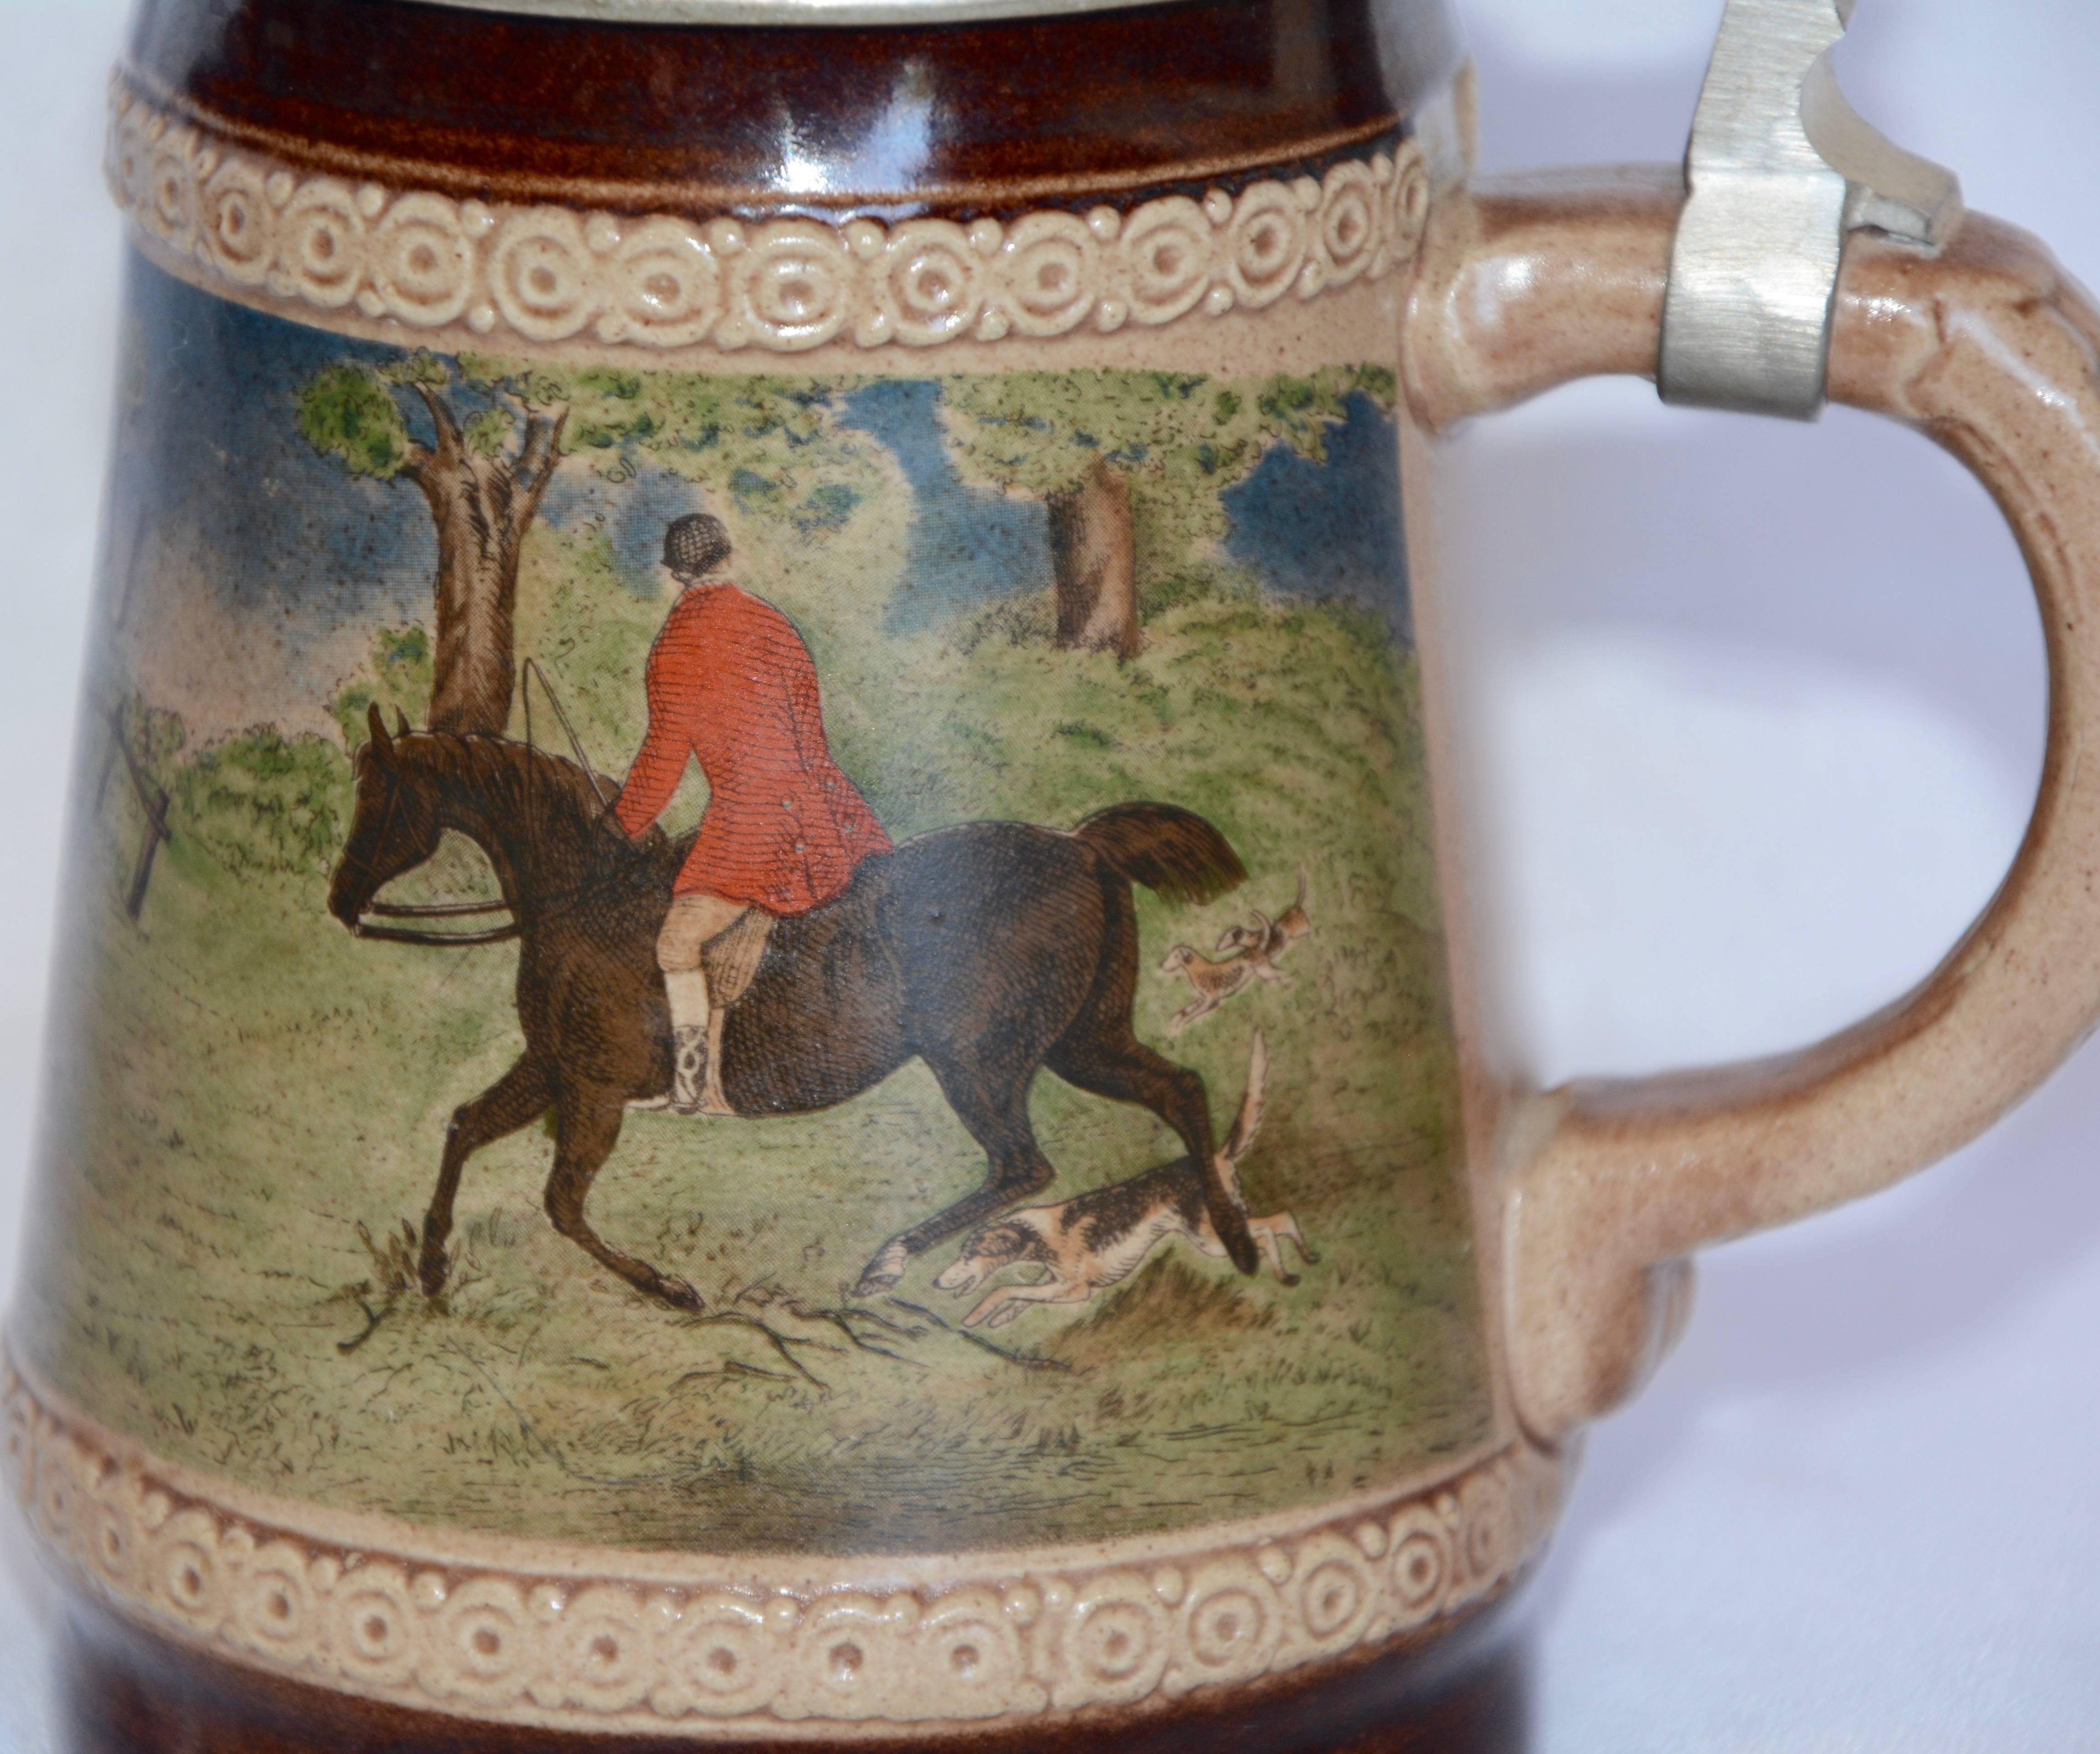 The hunt is on with the dogs chasing the fox and the riders on horseback are in action on this midcentury beer stein. It was made by the Marzi and Remy Company of Germany which was founded in 1880. The porcelain stein has been carefully crafted on